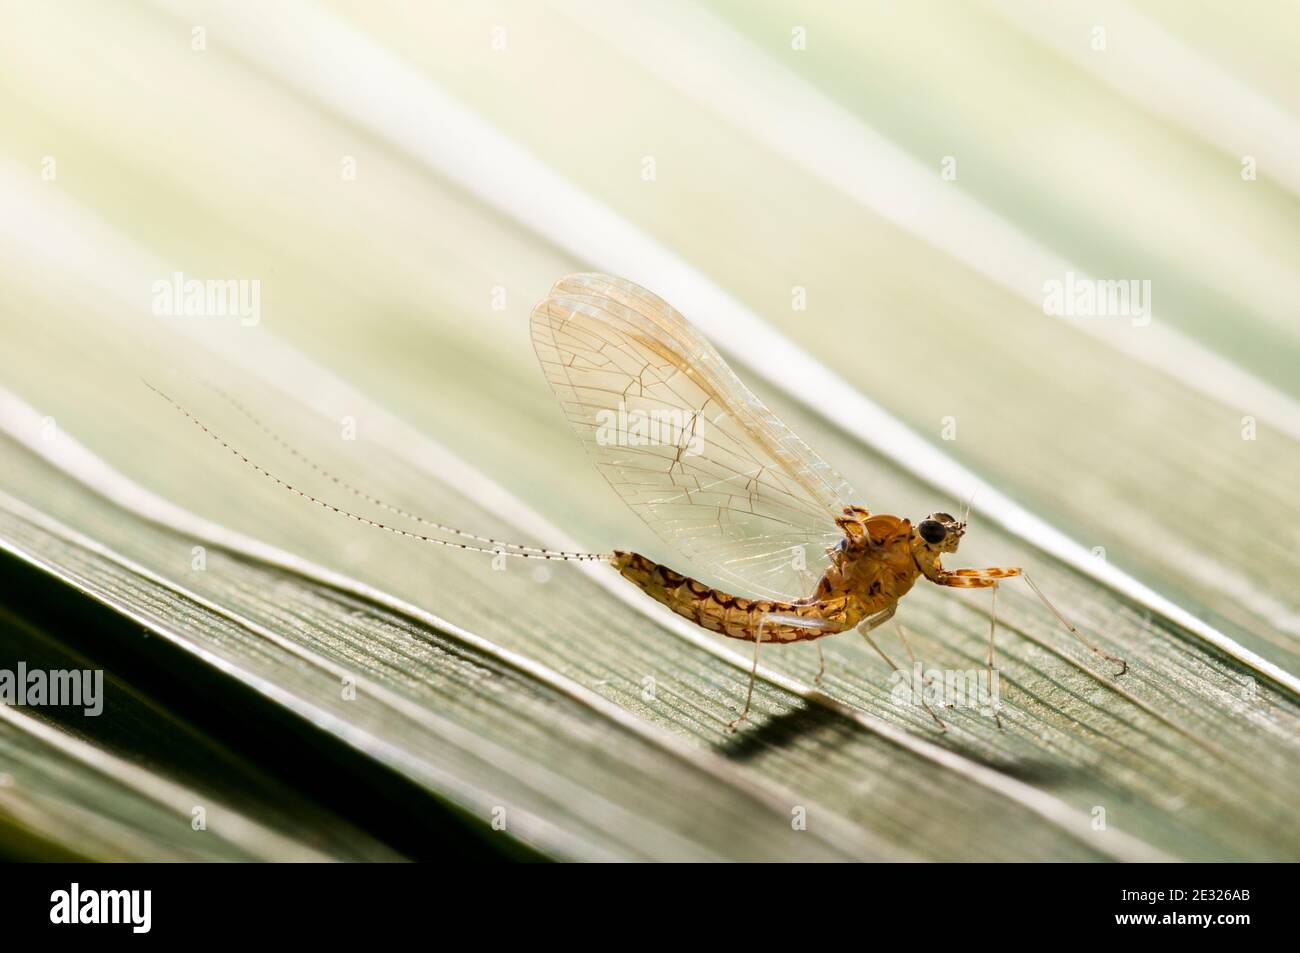 A spinner of the pond olive mayfly (Cloeon dipterum) perched on a leaf in a garden in Sowerby, Thirsk, North Yorkshire. July. Stock Photo